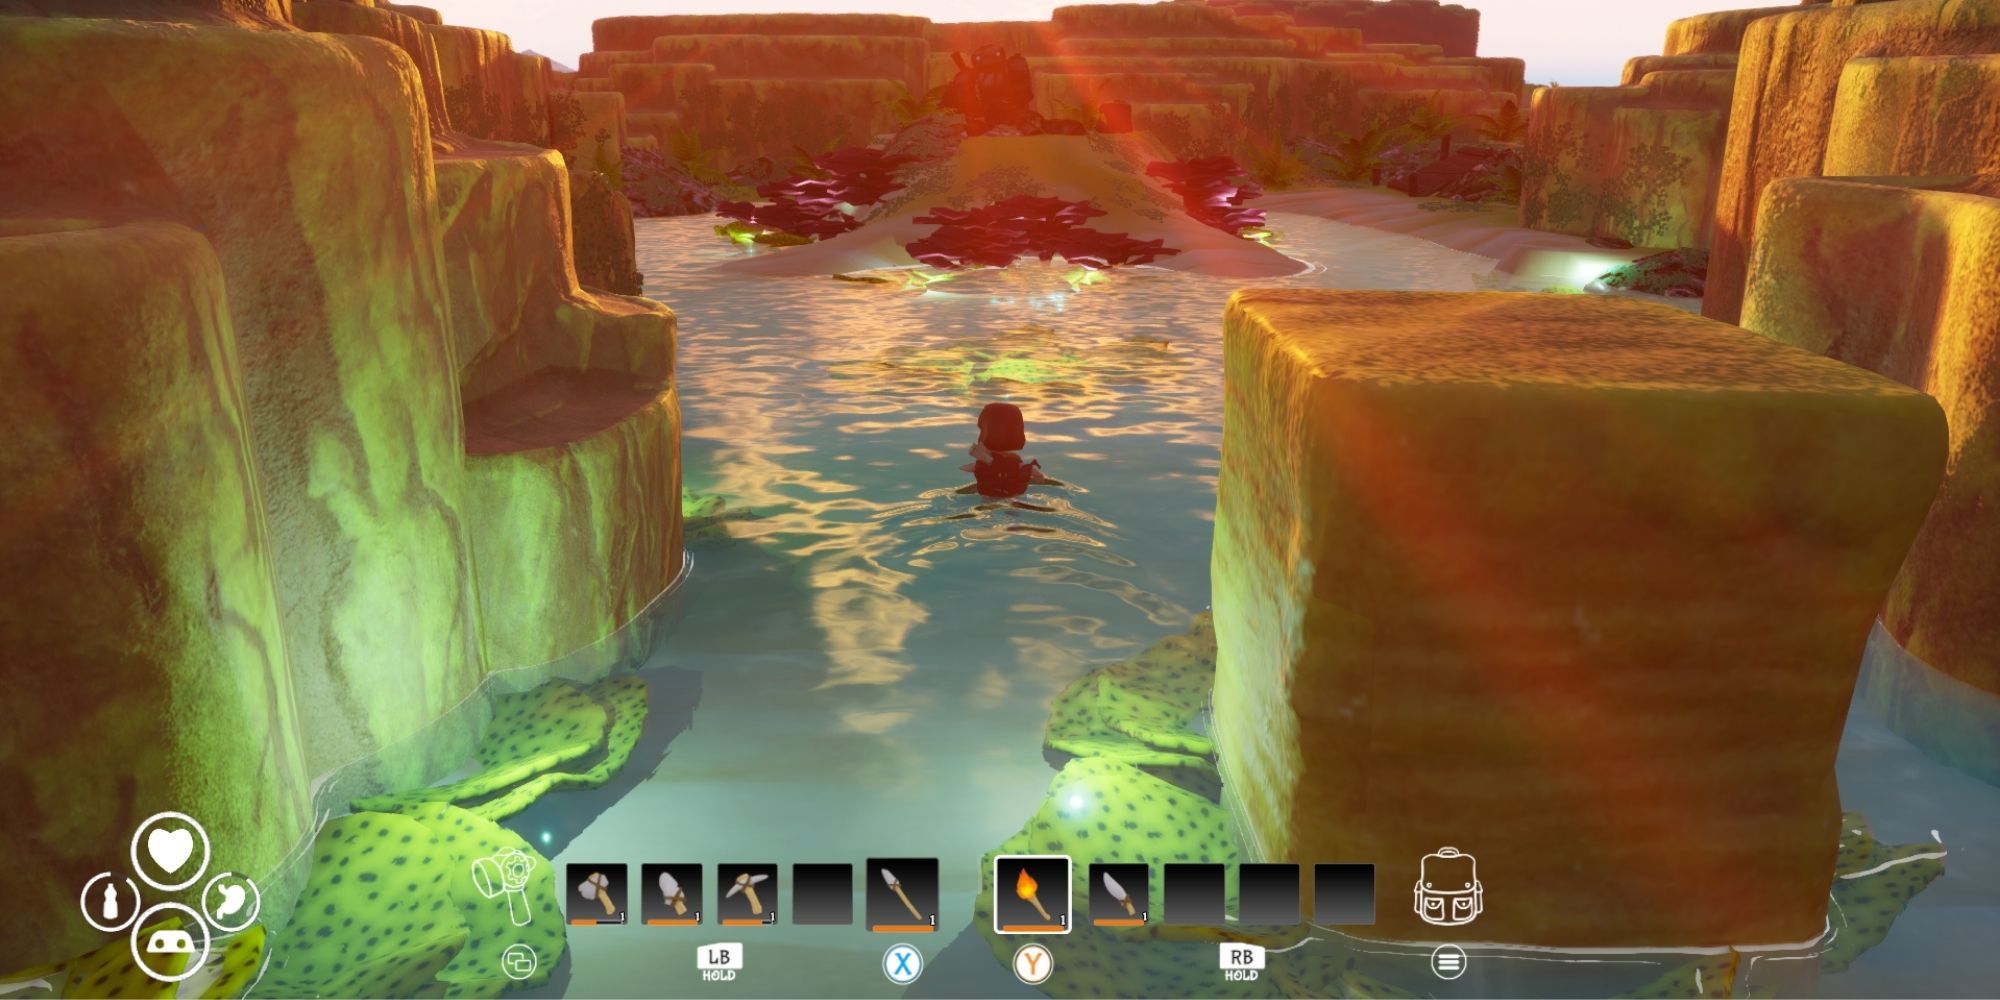 ToGather Island - in-game screenshot of player swimming